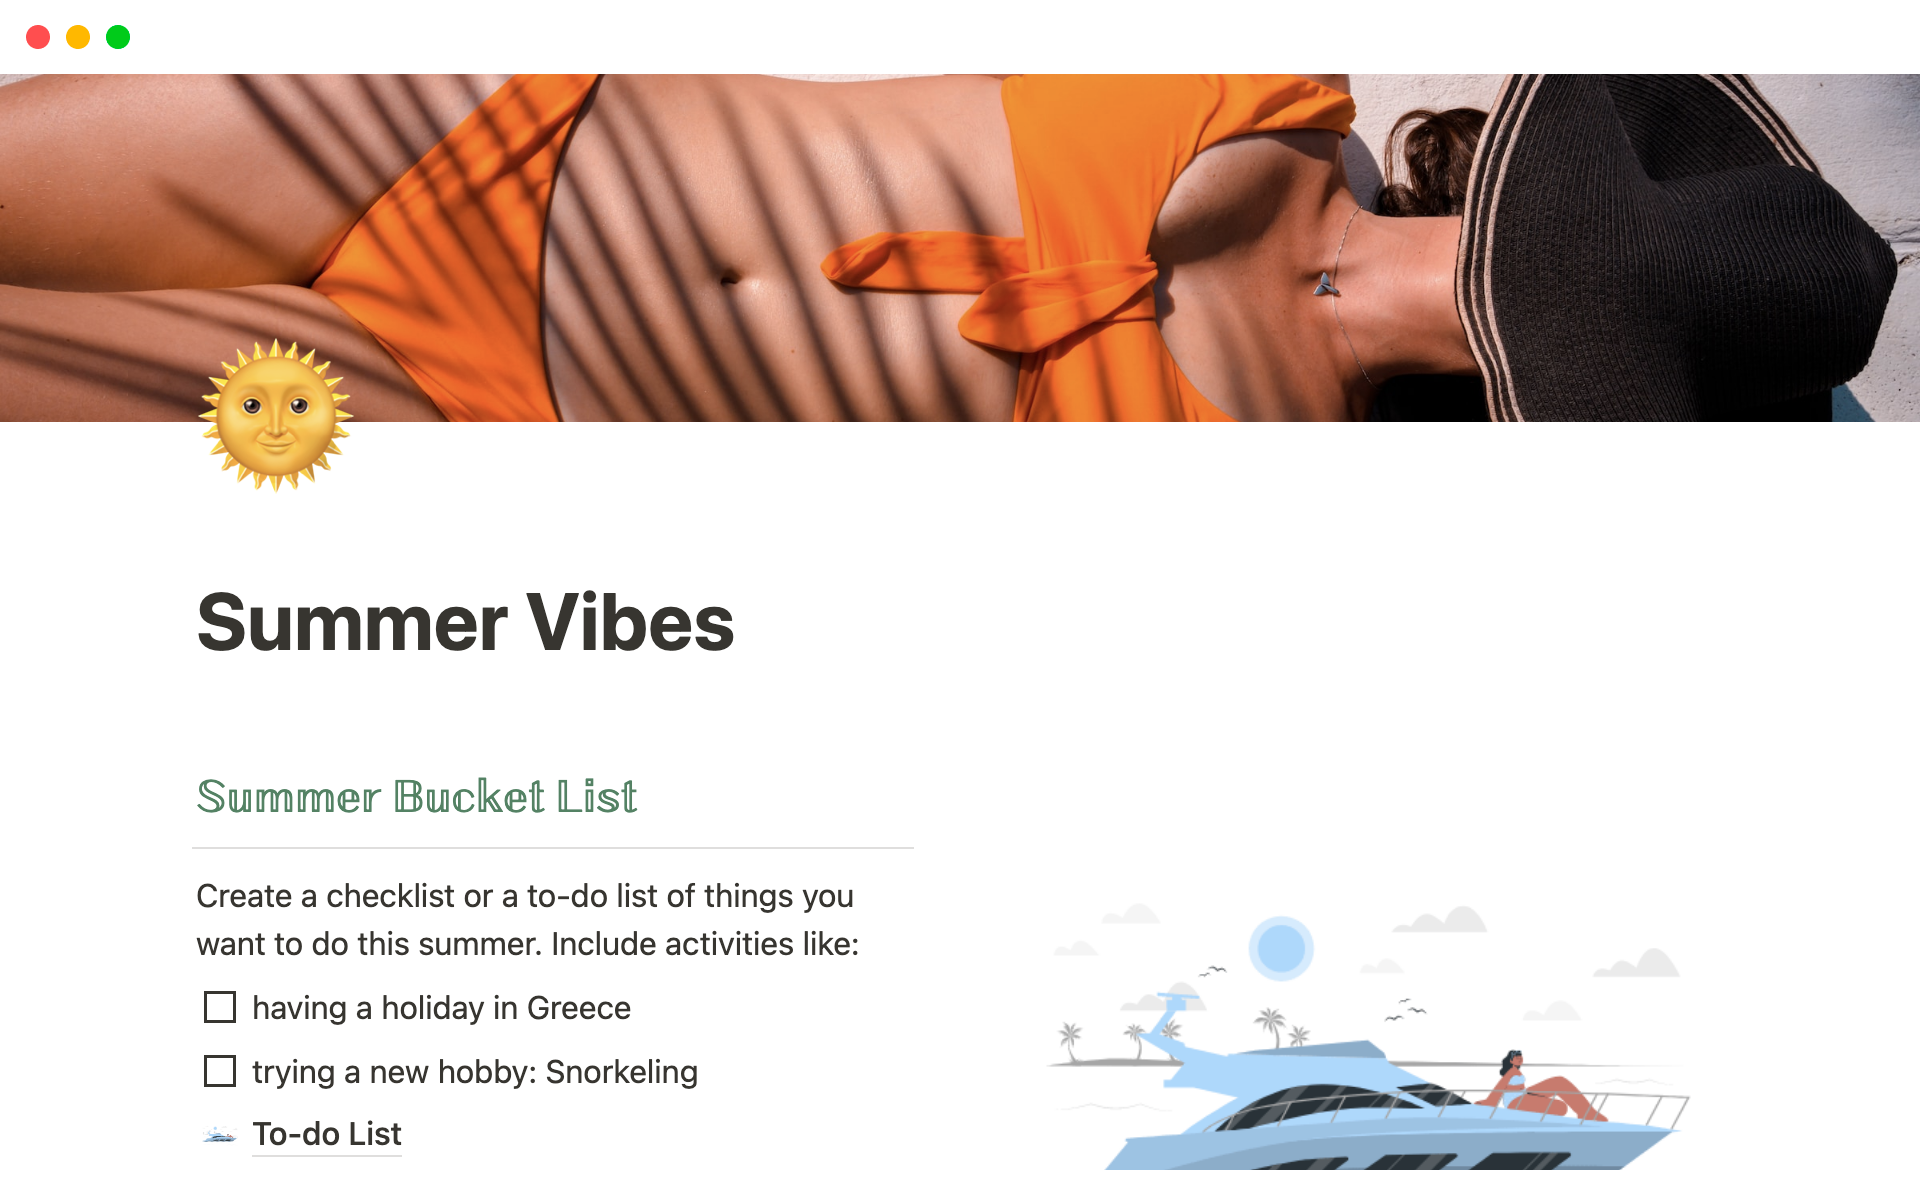 The Summer Vibes Notion Template provides a range of features such as animated gifs, a to-do planner, journal, gallery, and quotes to help users capture and celebrate the spirit of the summer season.